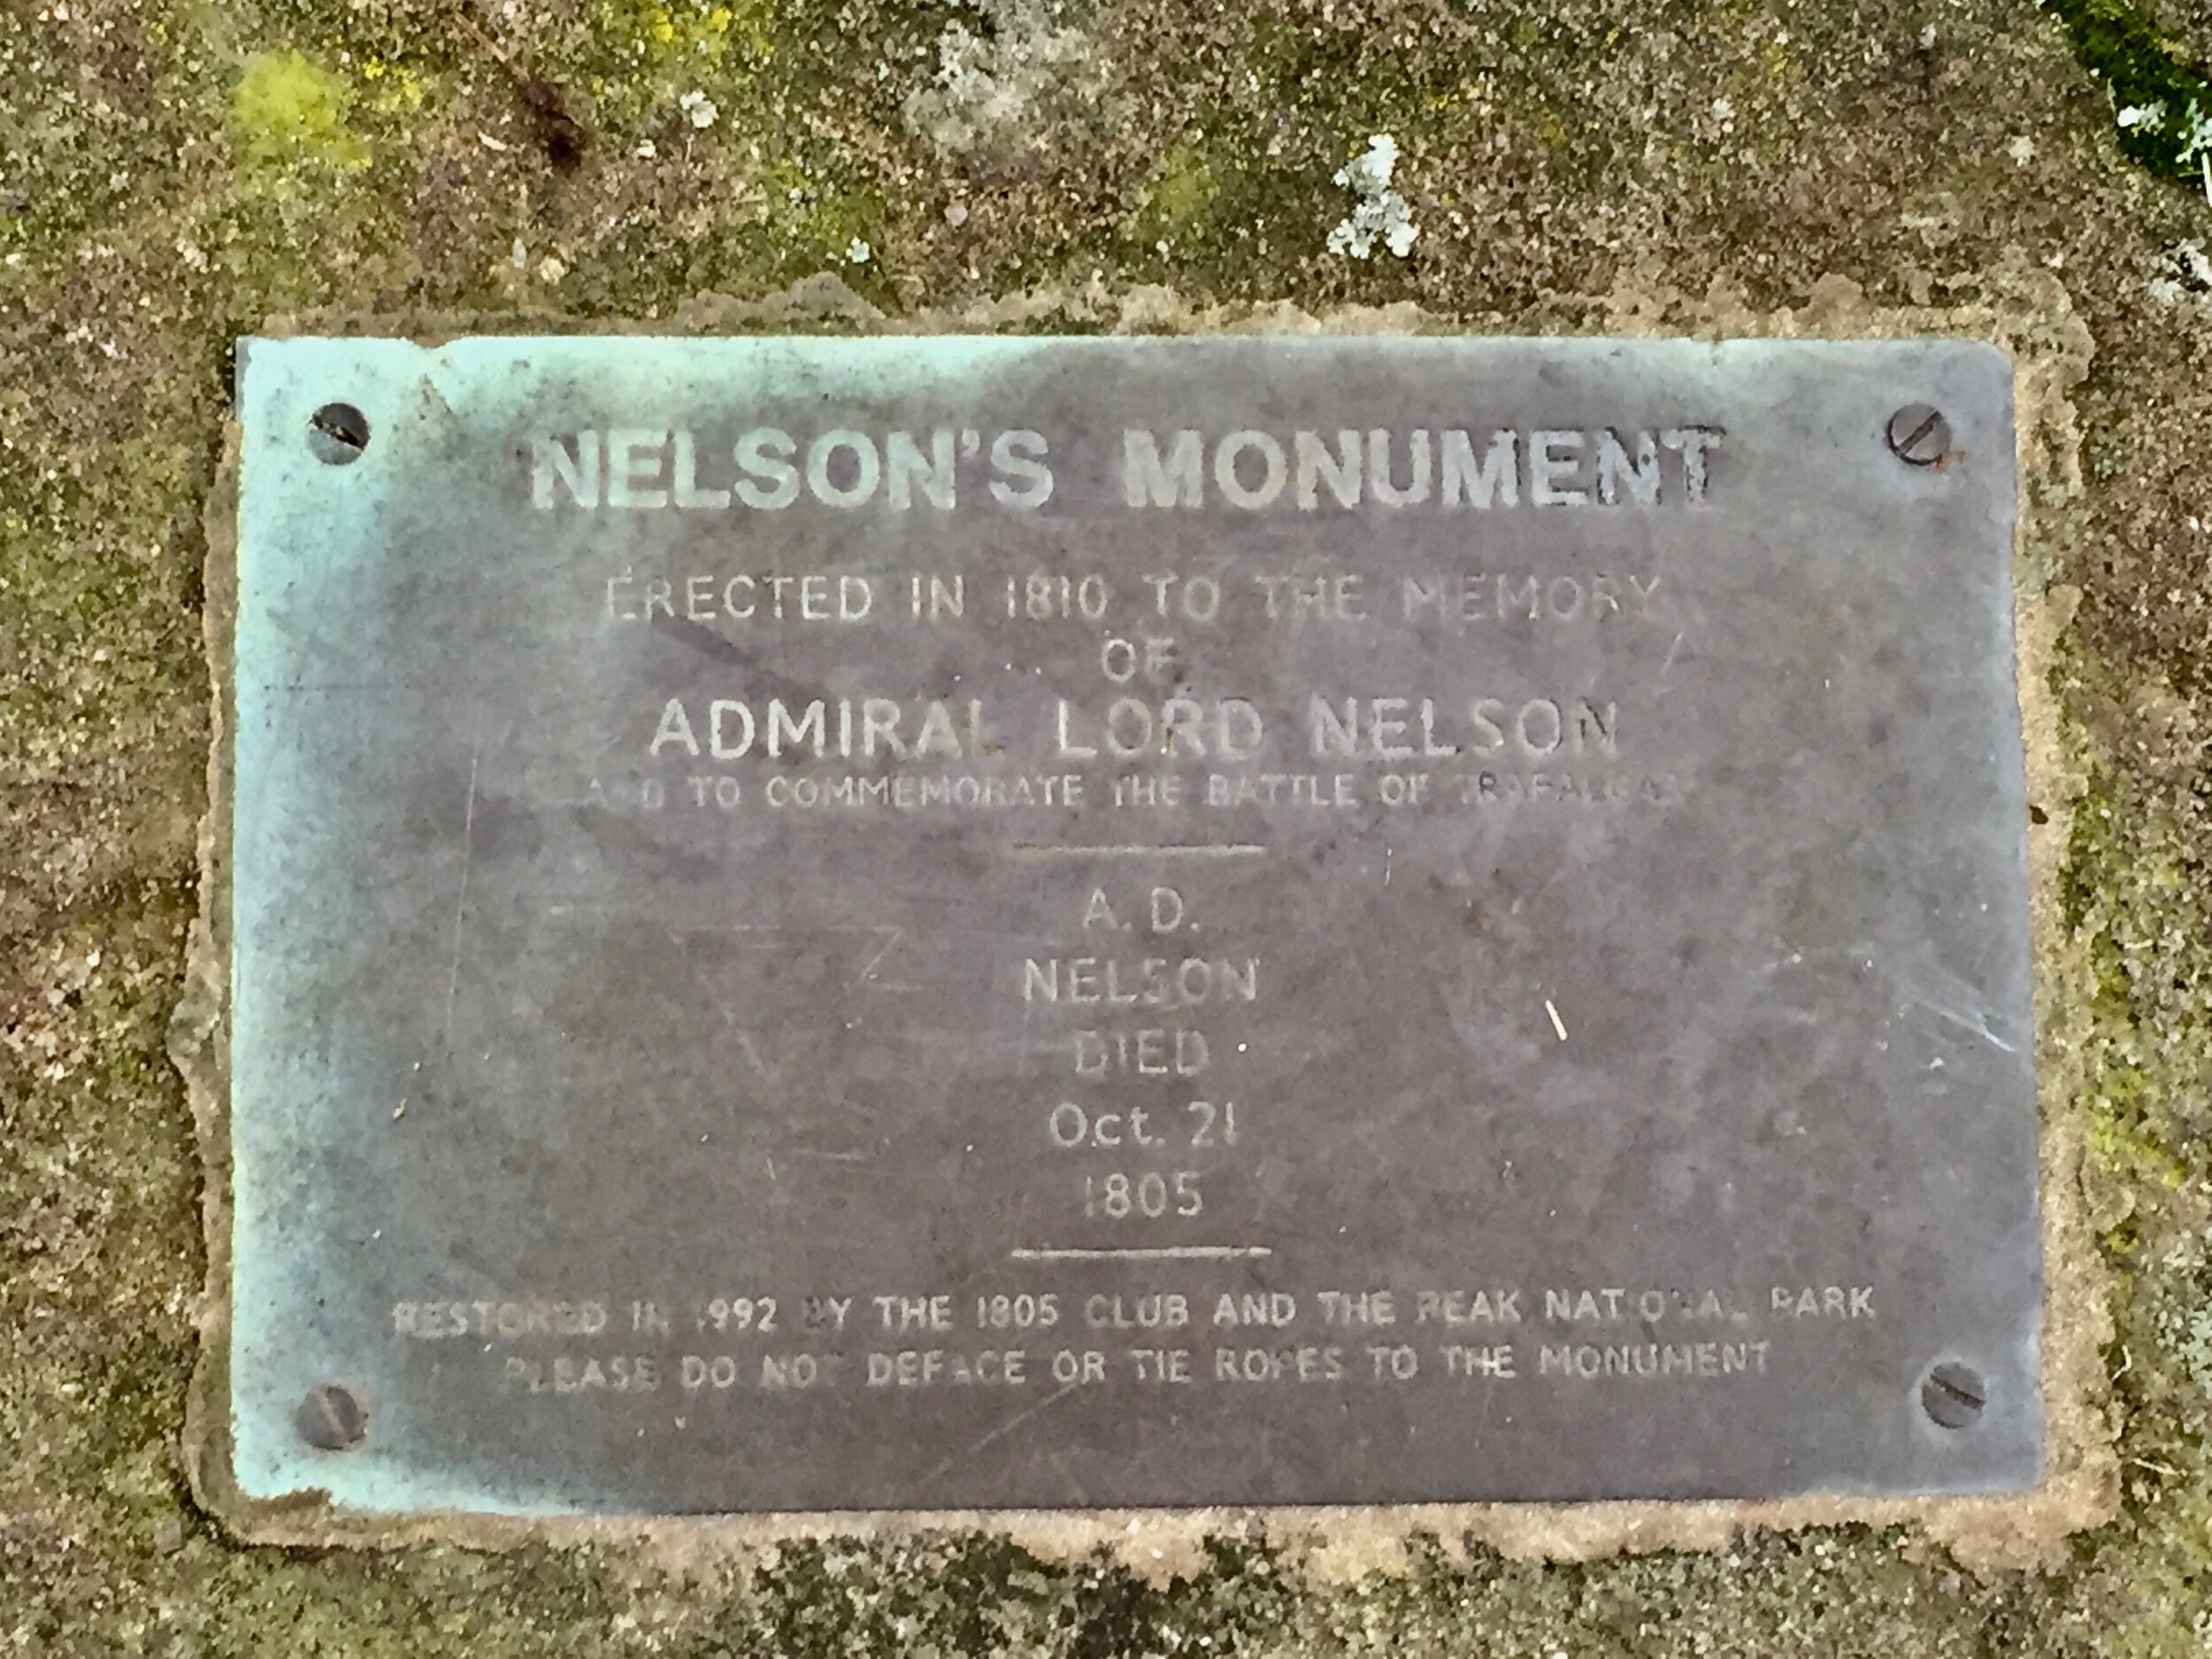  A close-up of the plate on the ground next to the obelisk. It reads ‘Nelson’s Monument / Erected in 1810 to the memory / of / Admiral Lord Nelson / To commemorate the Battle of Trafalgar / A.D. / Nelson / Died / Oct. 21 / 1805 / Restored in 1992 by 